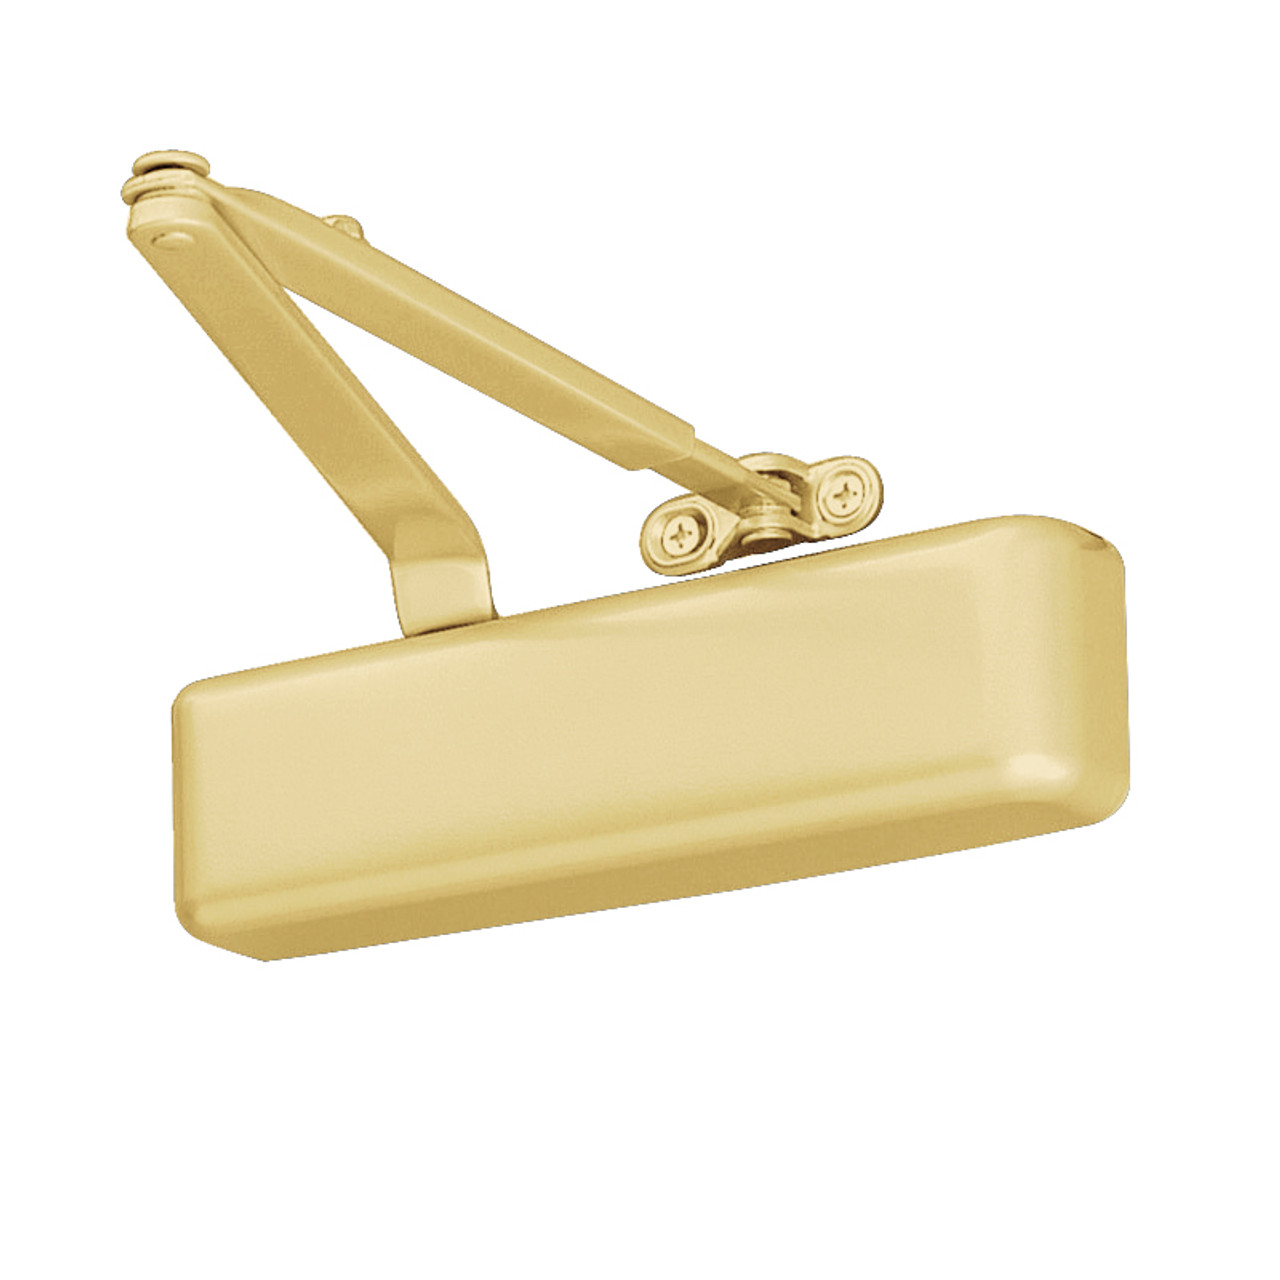 4031-HLONG-US4 LCN Door Closer with Hold Open Long Arm in Satin Brass Finish